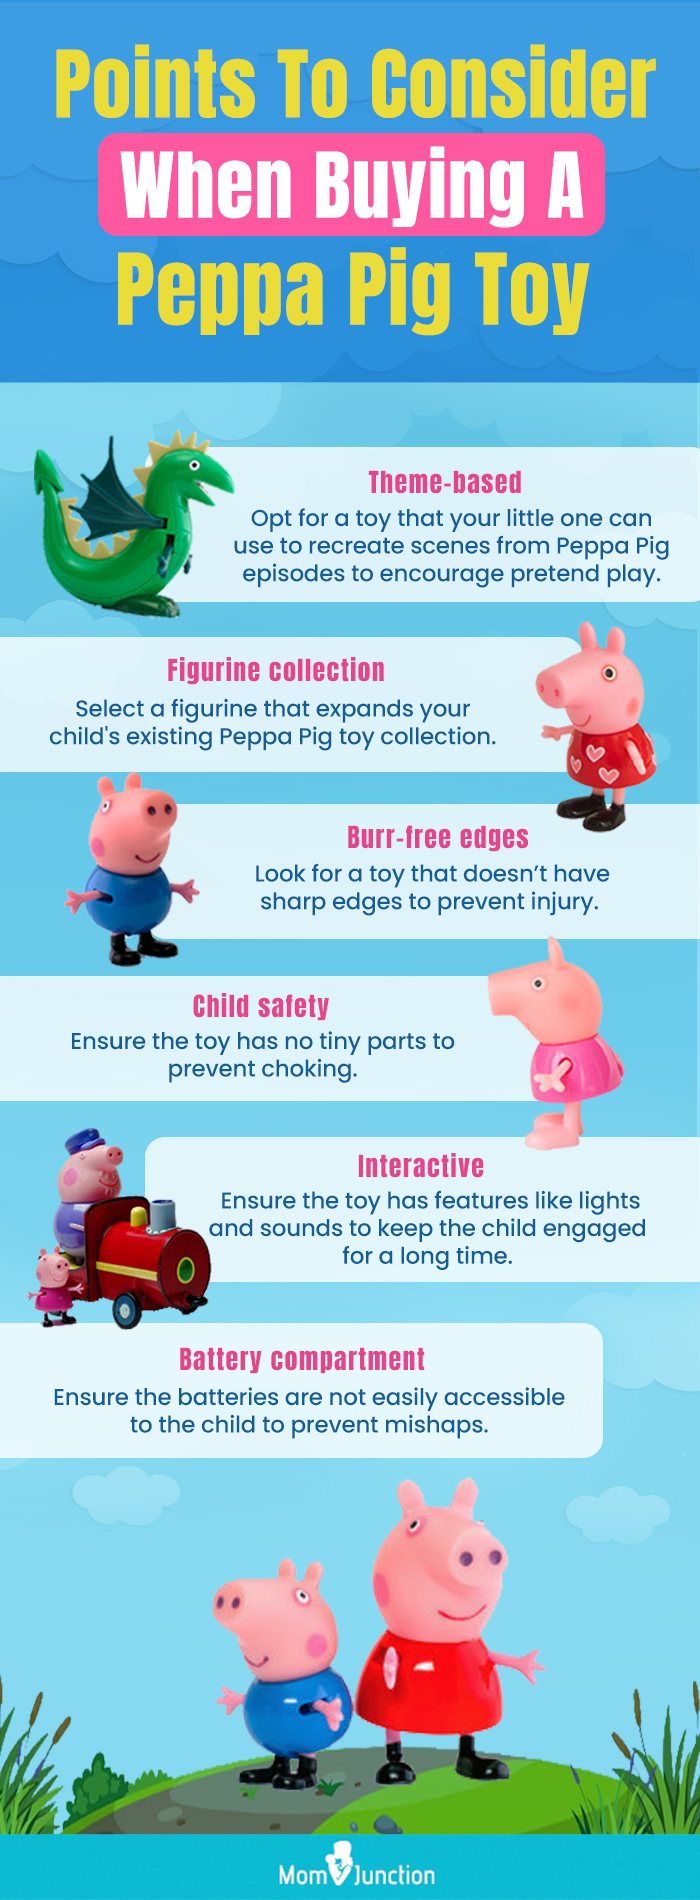 Points To Consider When Buying A Peppa Pig Toy